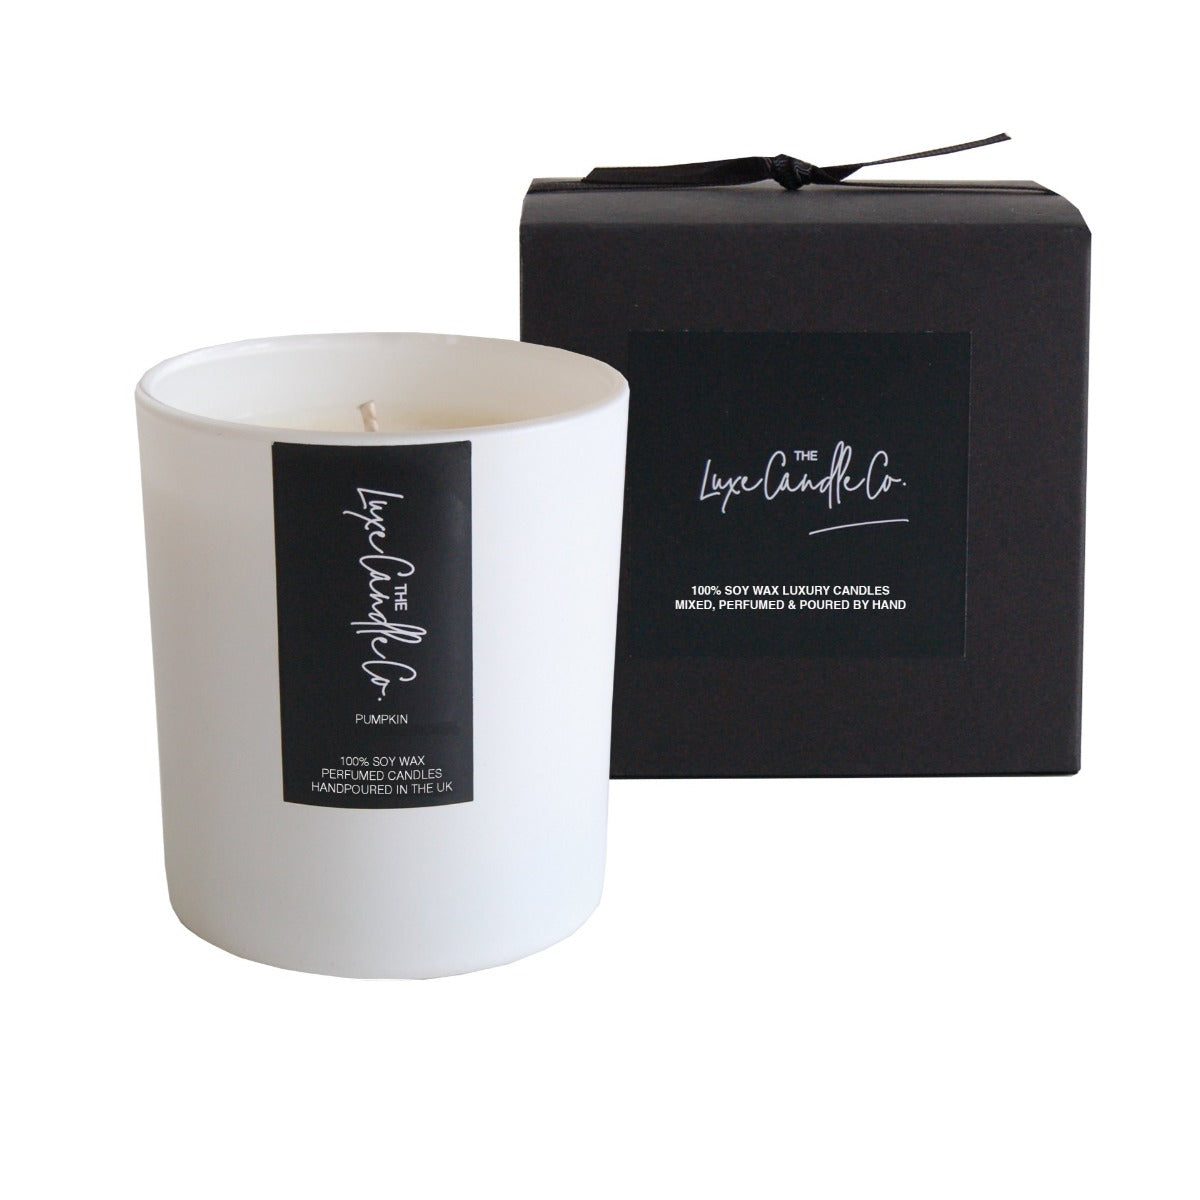 White pumpkin scented candles | The Luxe Candle Co